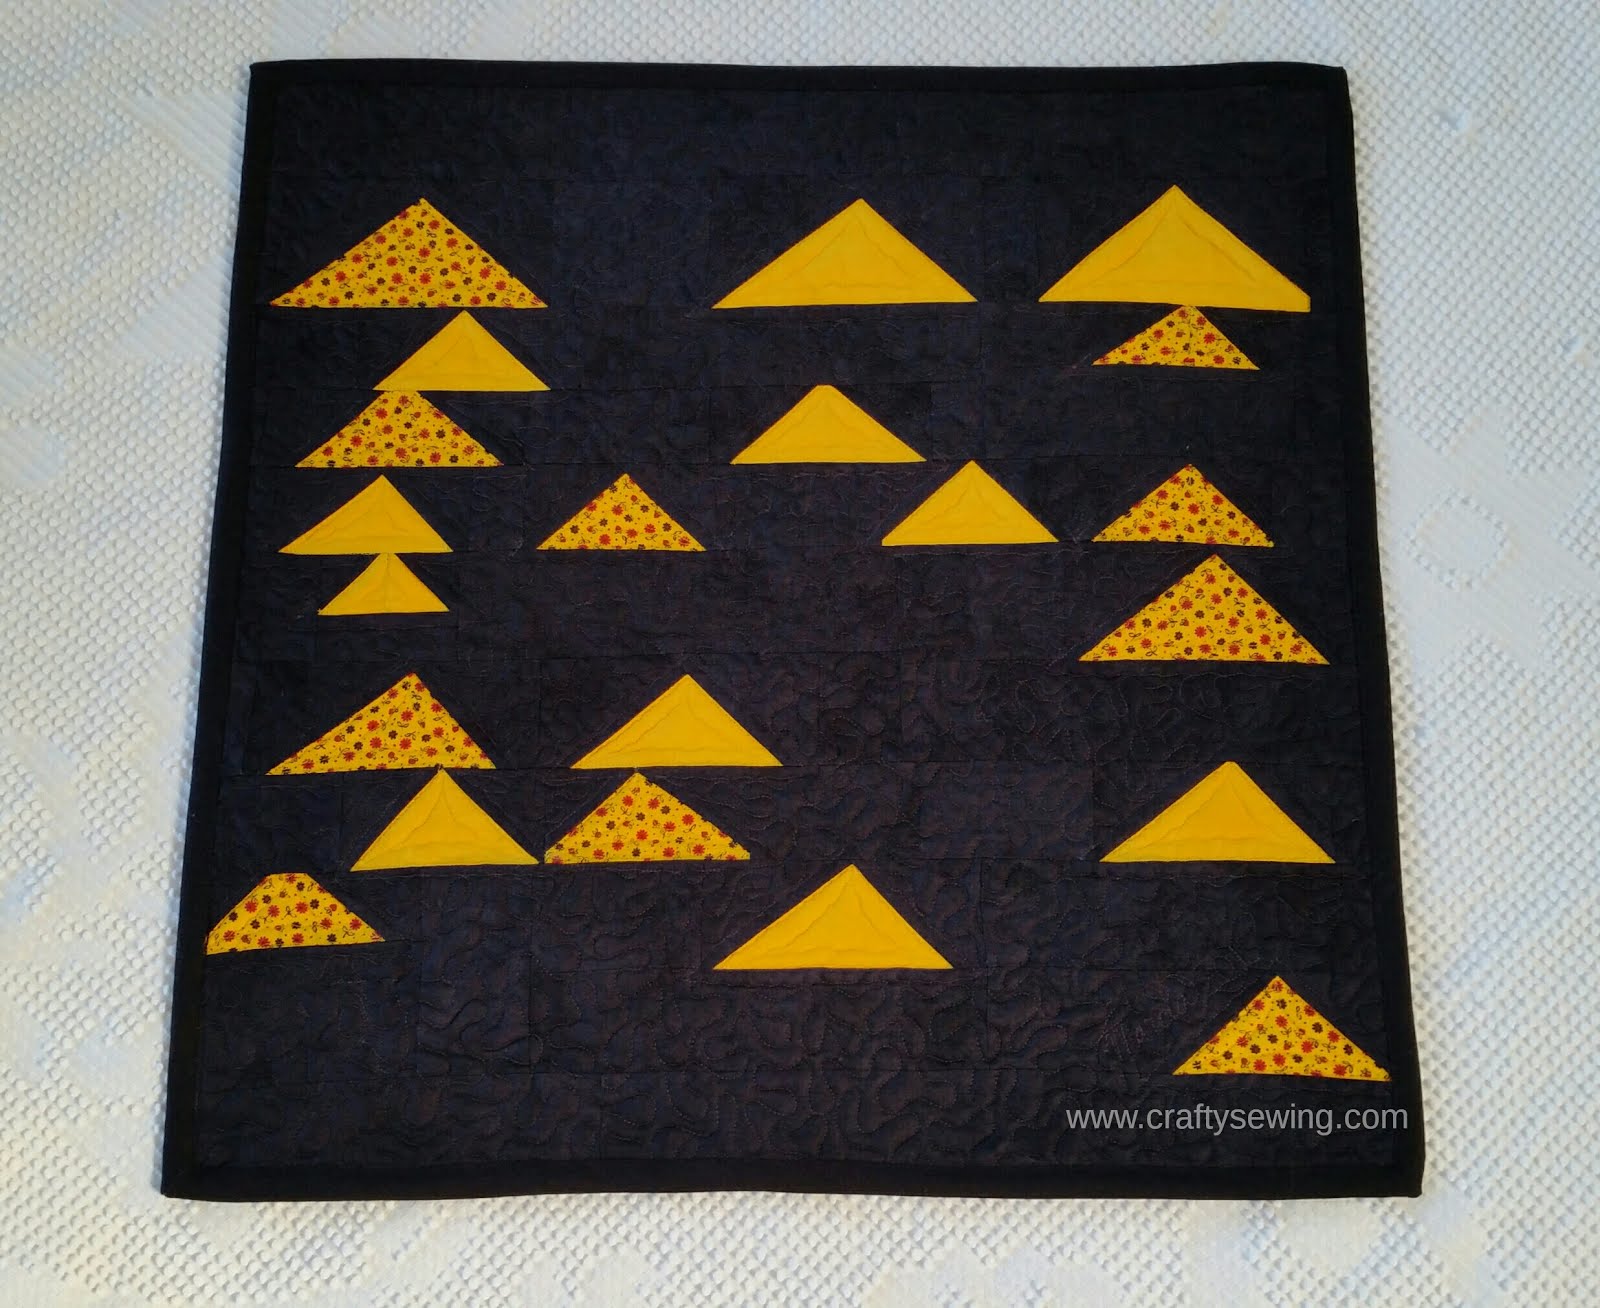 2015 Off Season 6 Project Quilting Challenge - September